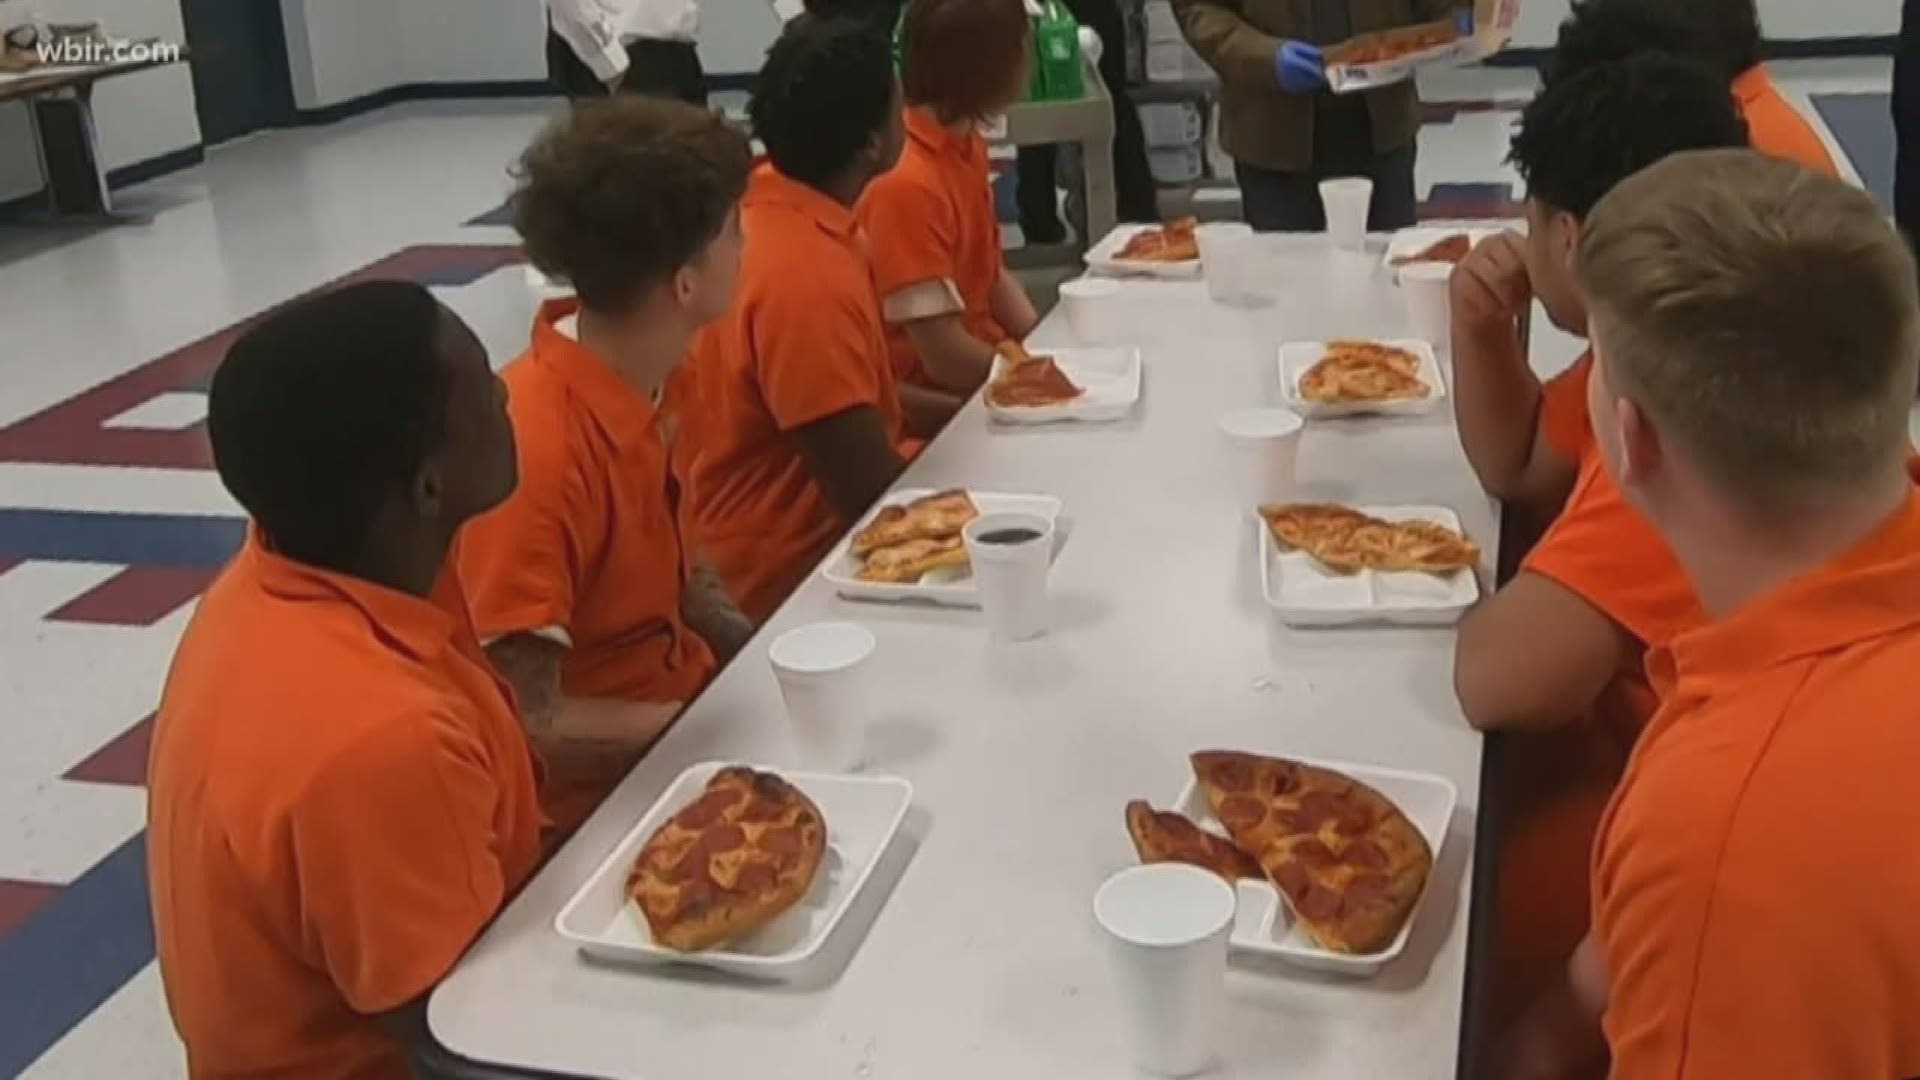 On Sunday, Charlie Susano brought dozens of pizzas to the Richard L. Bean Detention Center ahead of the Super Bowl.